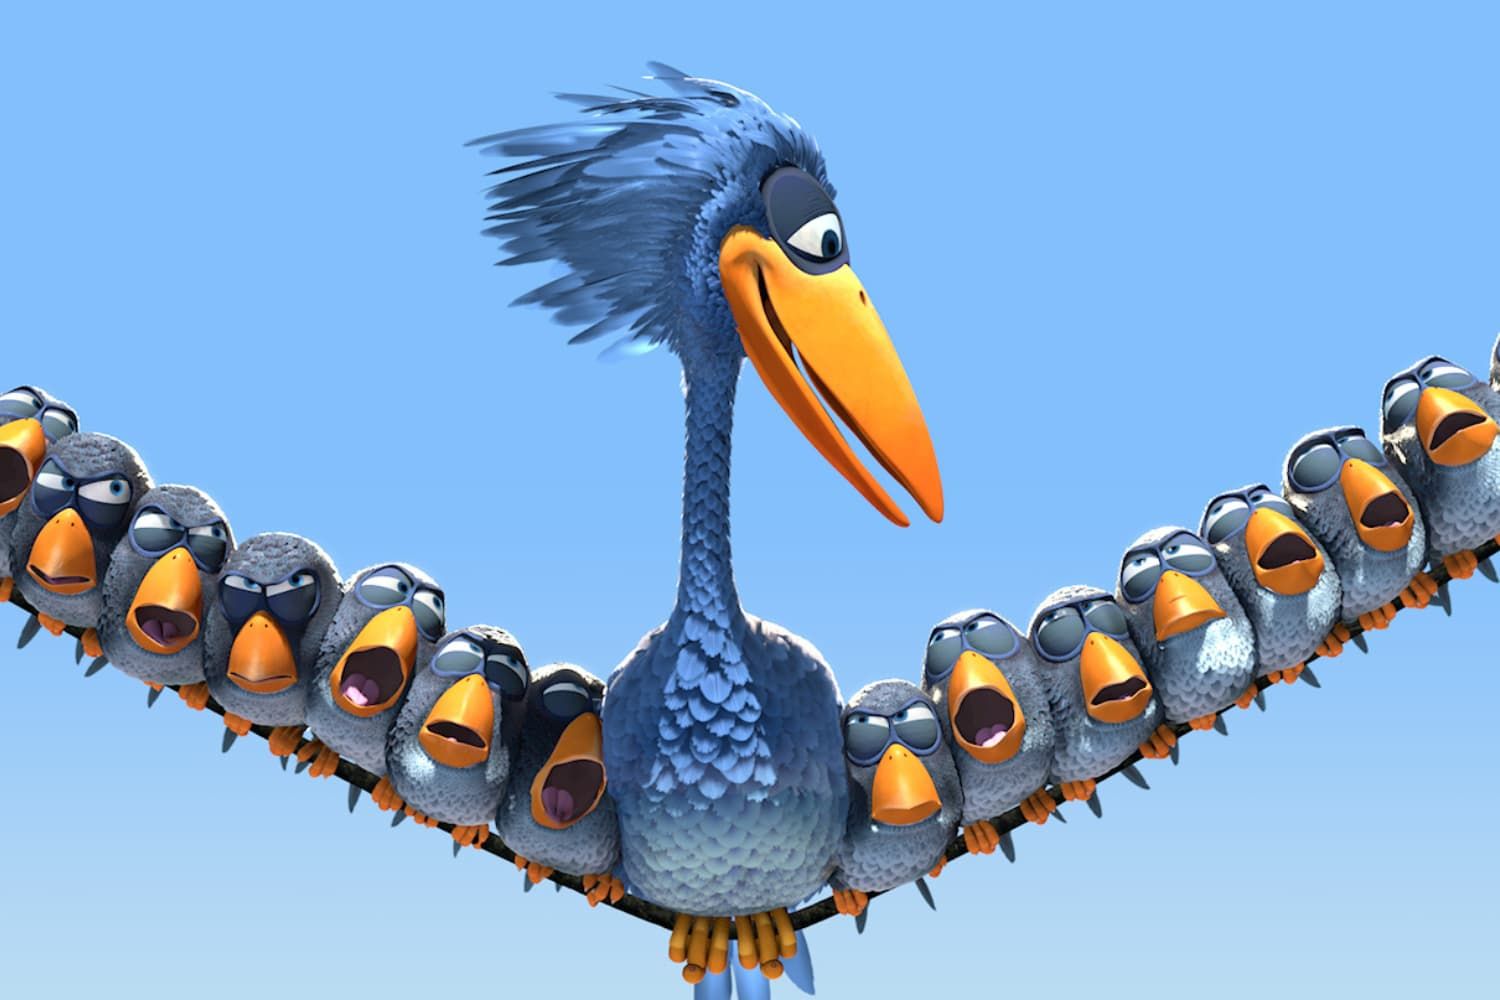 For%20the%20birds%20animation%20video%20Pixar-7d81b3b5 Emotions